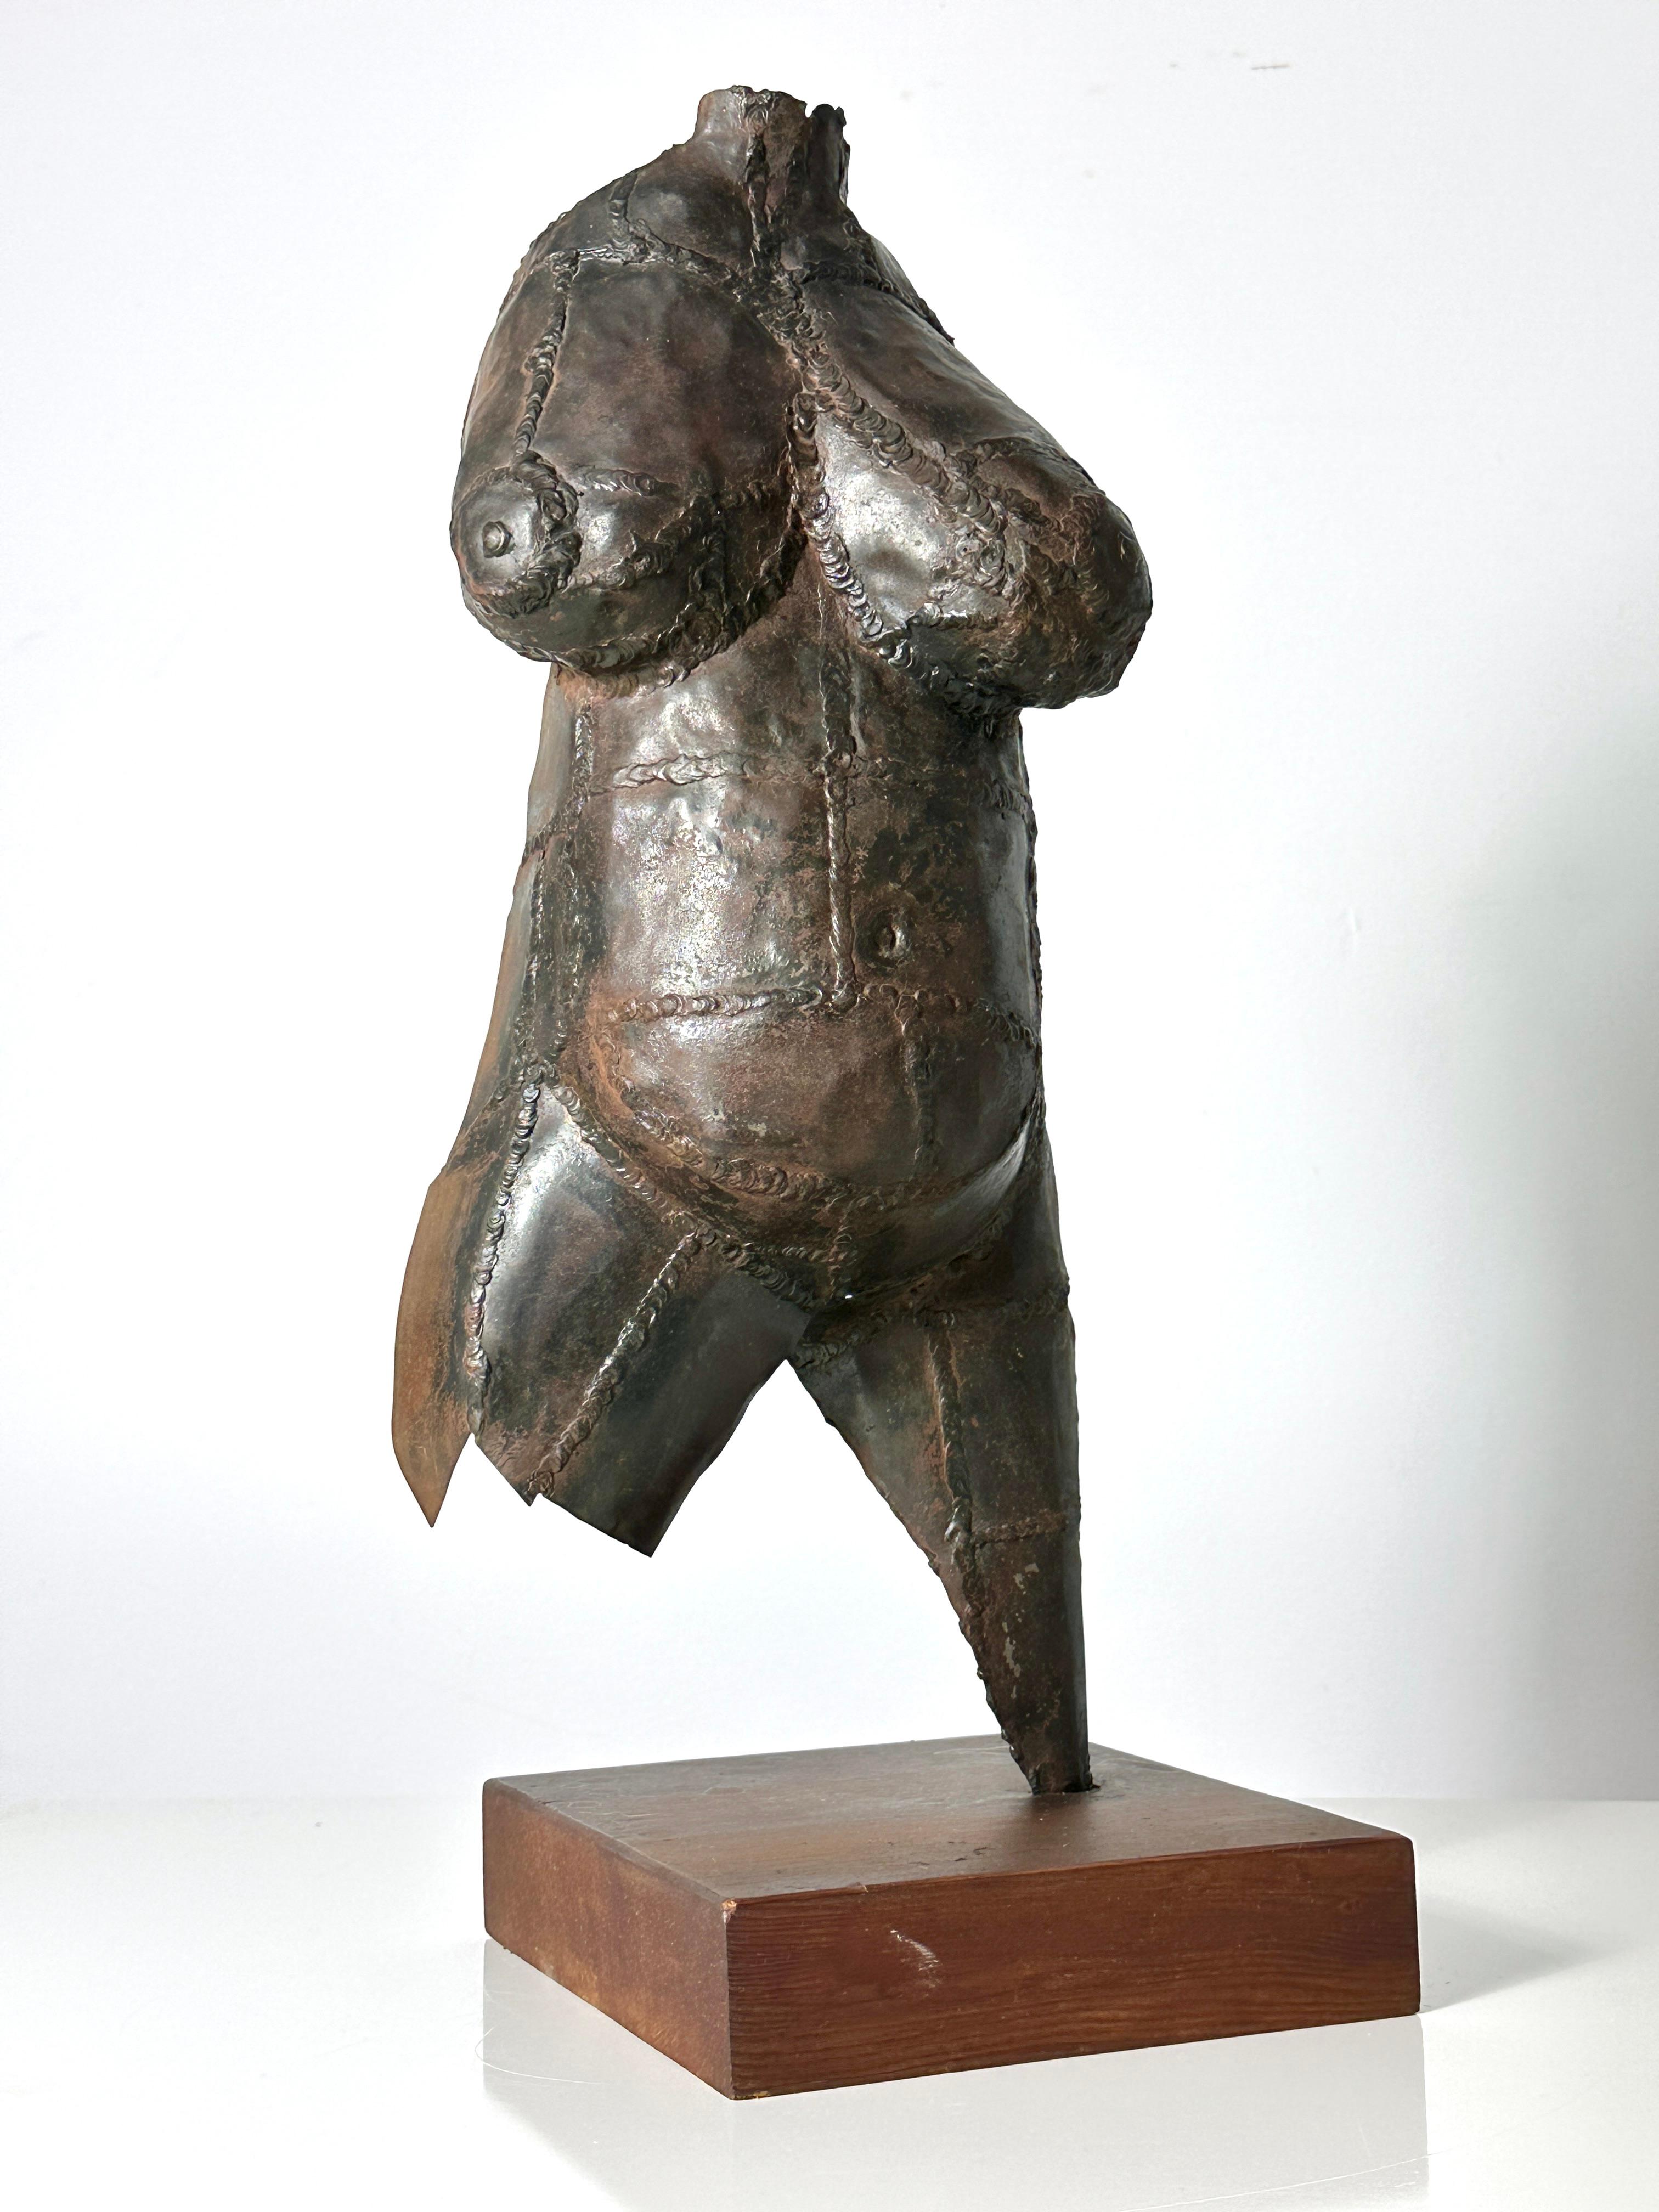 Abstract nude sculpture by Ohio artist Fred Scott circa 1960s
Female torso molded from welded steel and mounted to wooden base
Acquired from the artist estate
Original exhibit tag to base